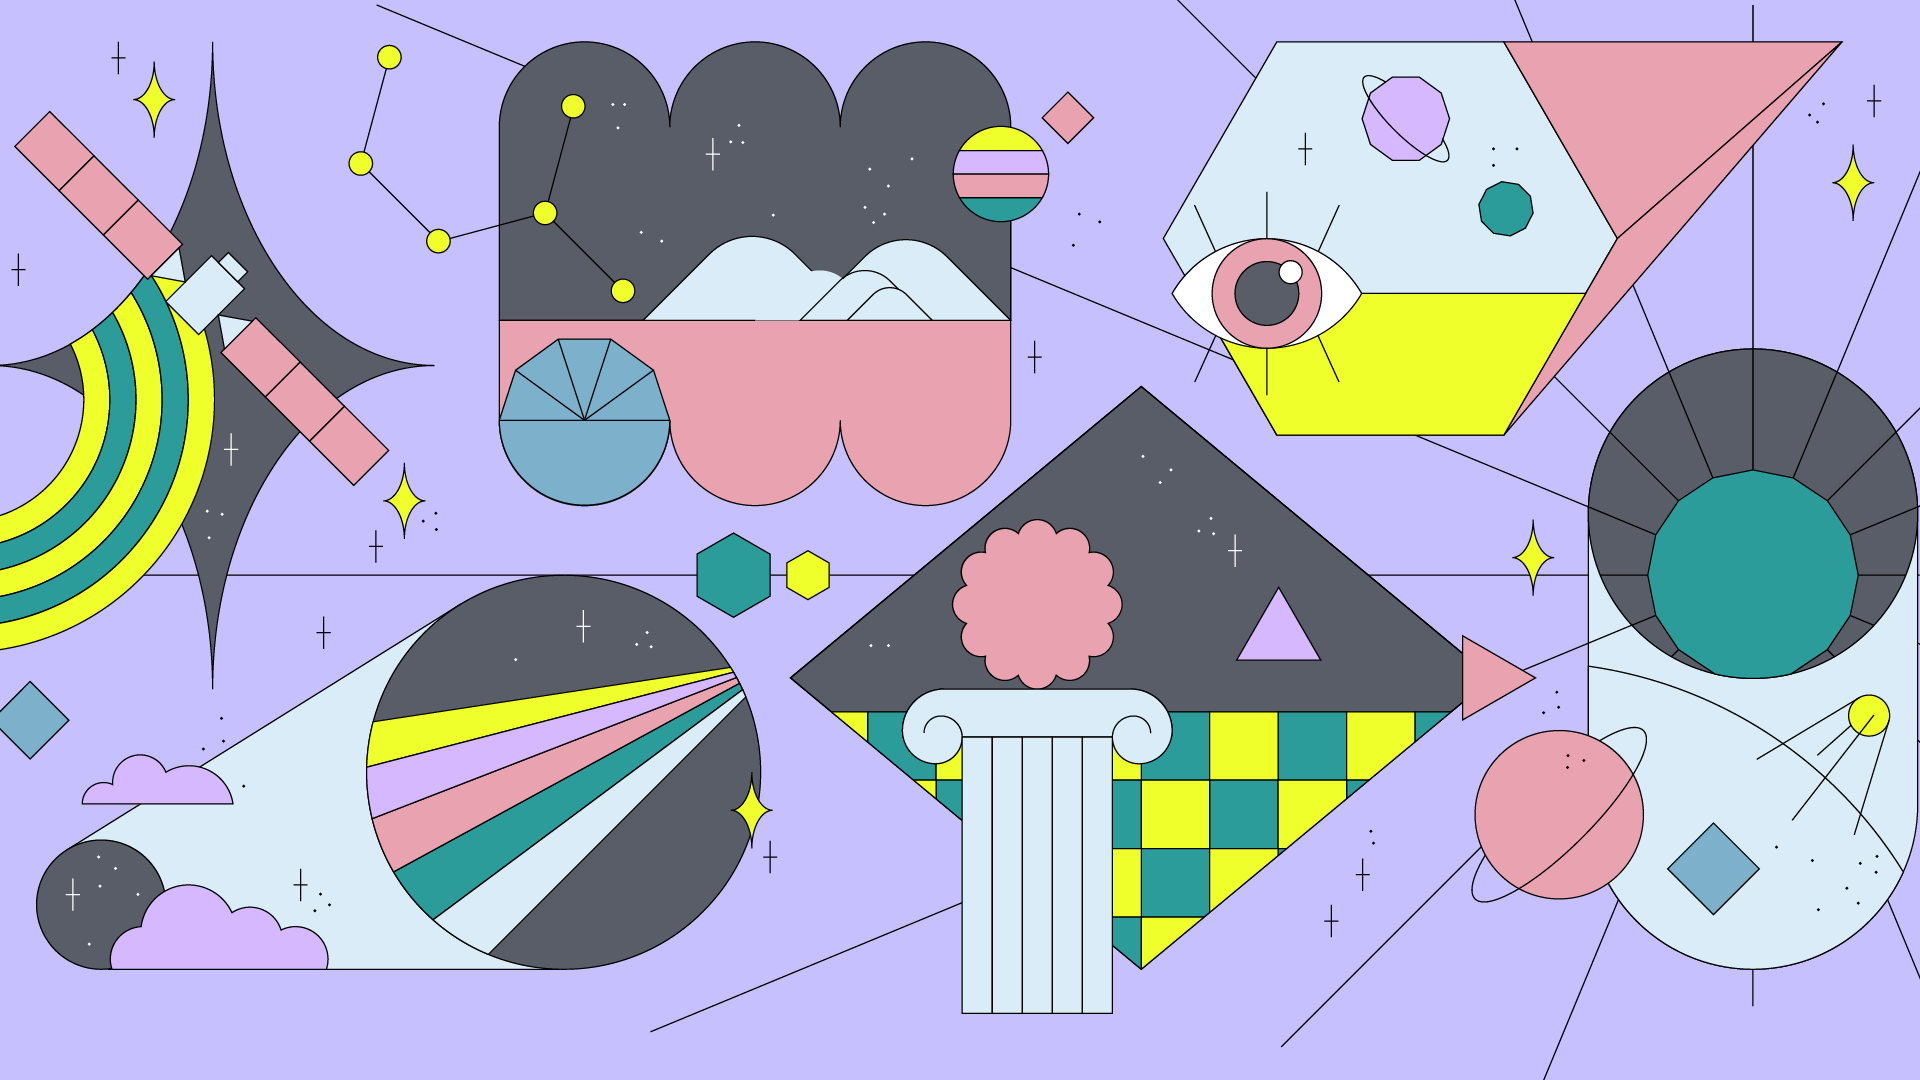 Abstract image with different colorful illustrations that reflect the future